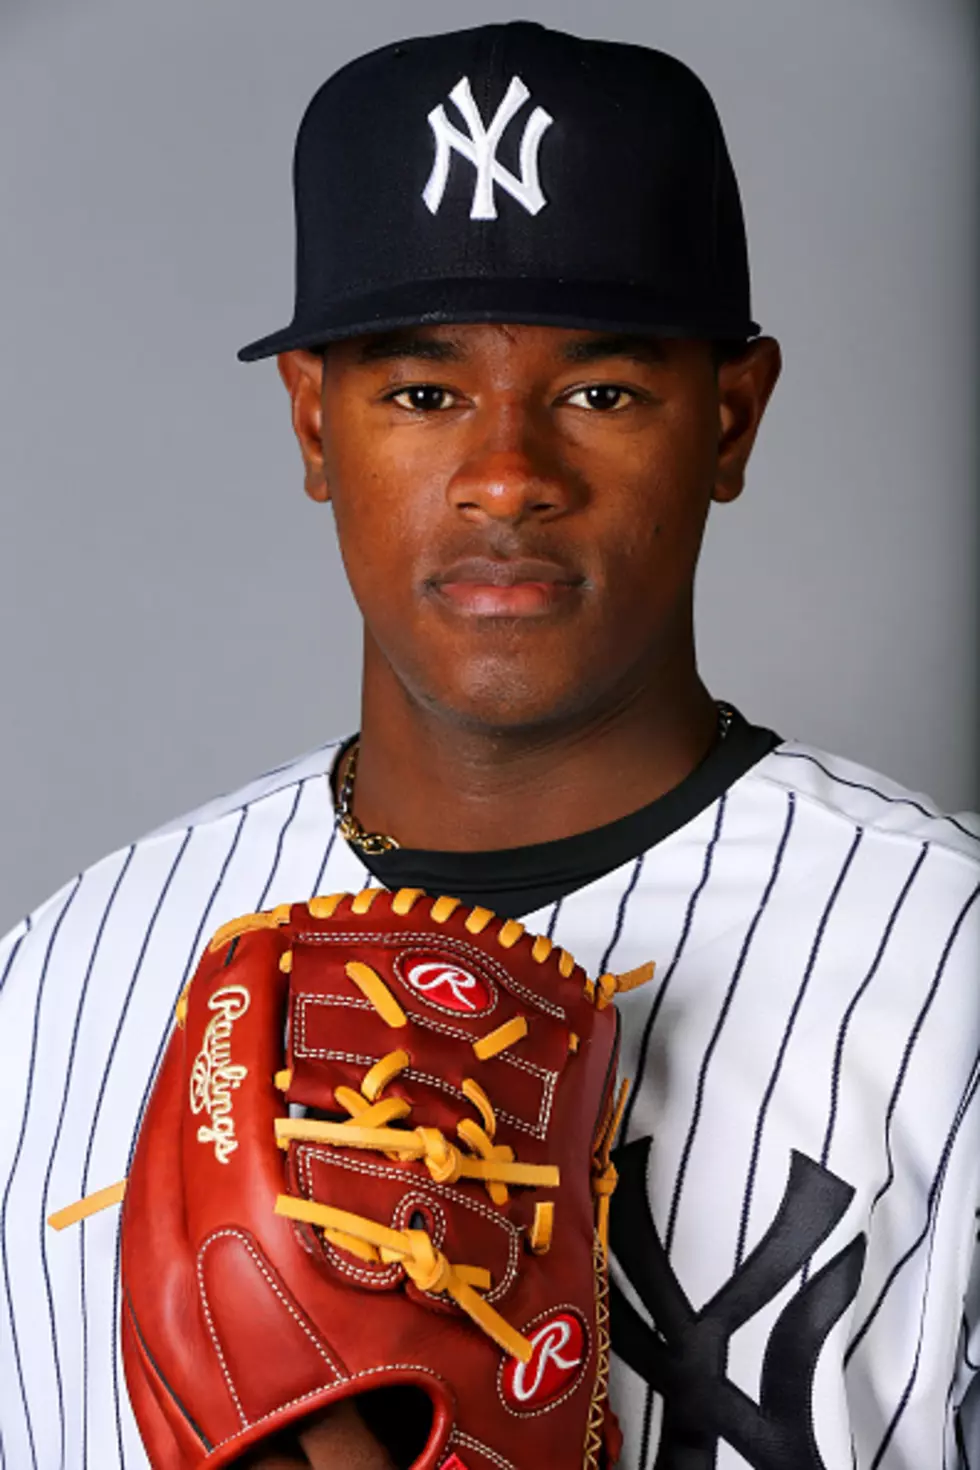 Yankees Vs Red Sox Enter Severino [PREVIEW]